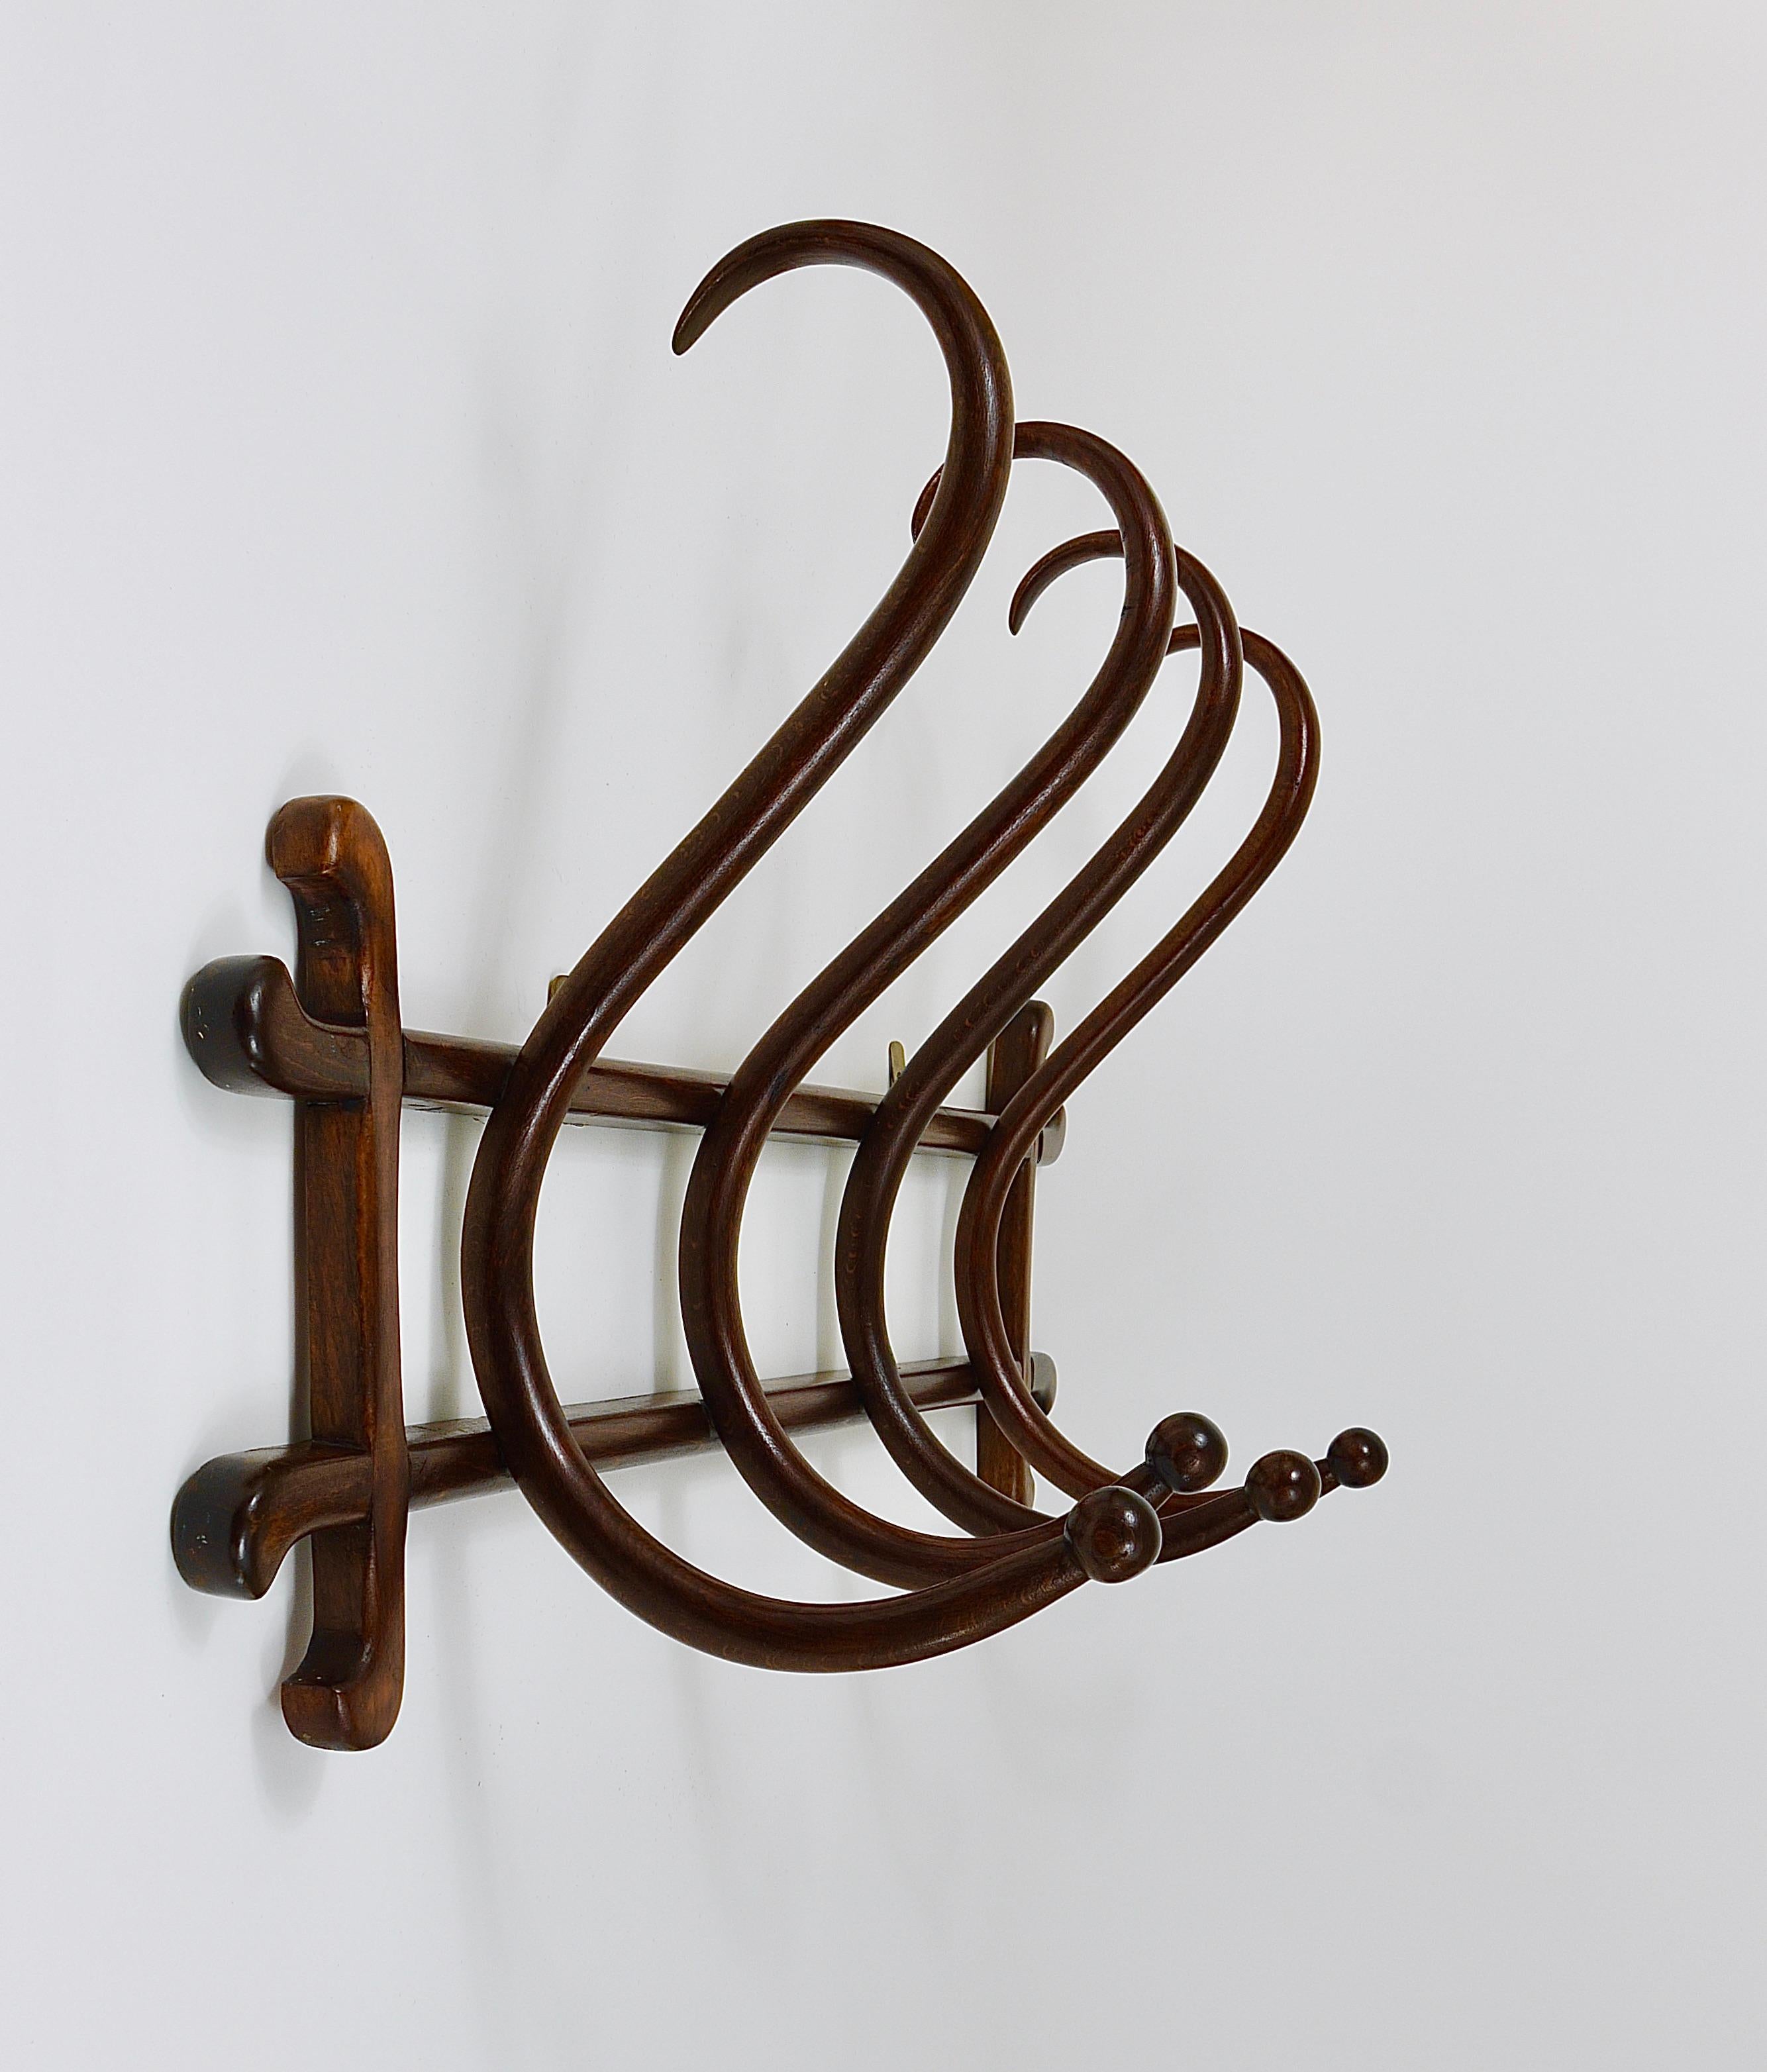 A beautiful original authentic Art Nouveau wall-mounted coat and hat rack / wooden wall hanger, dated around 1900, executed by Thonet Vienna, Austria. This wardrobe is made of dark brown bentwood with four S-shaped hooks. In good condition with